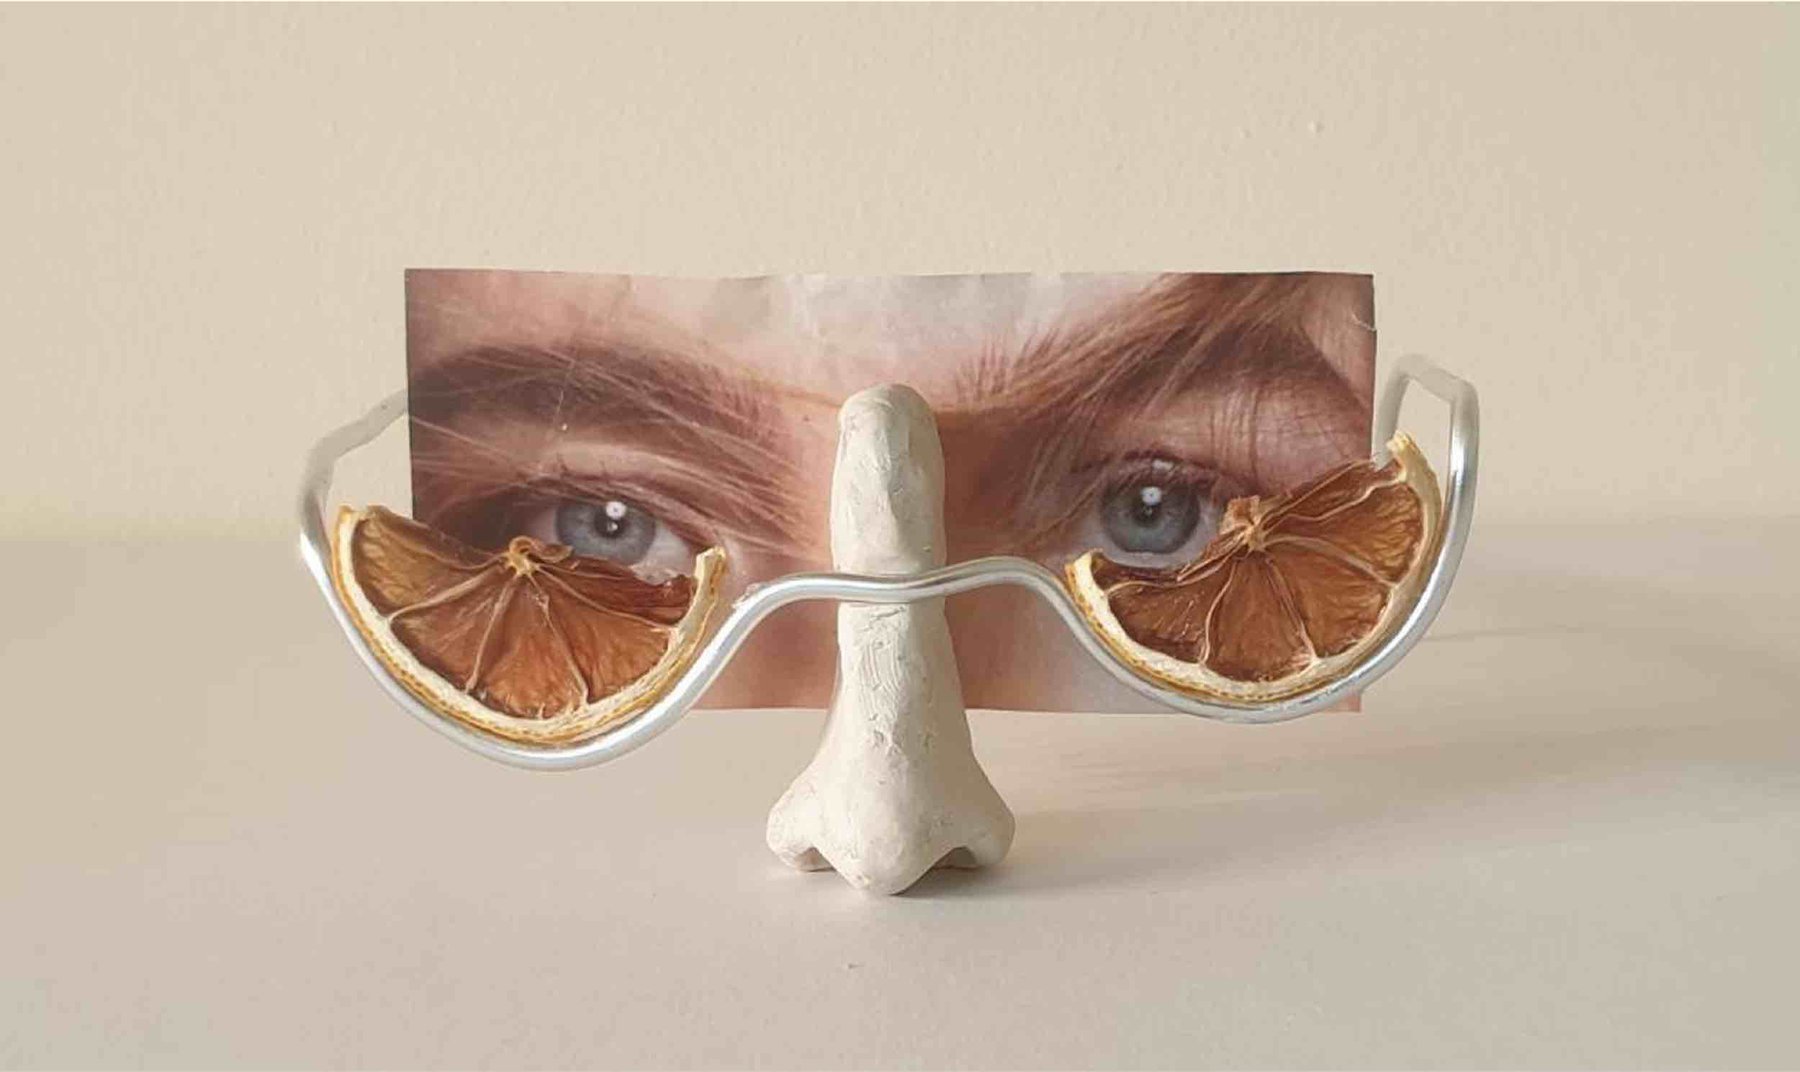 Glasses worn by an image of eyes